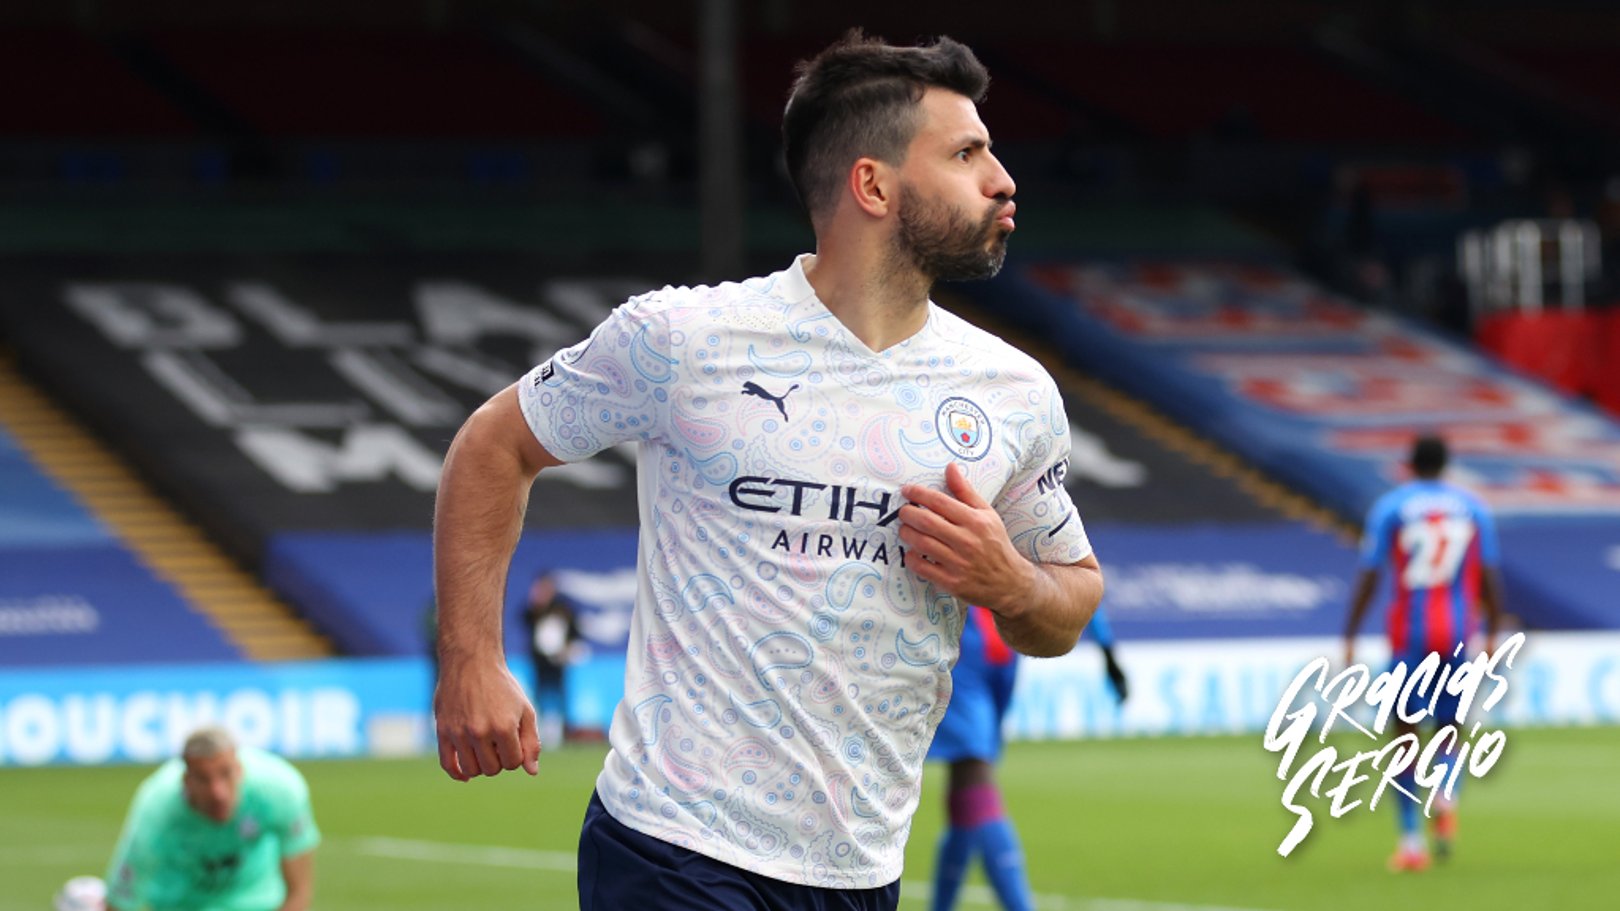 Videnskab lugt mulighed View from the pressbox: Aguero's legacy will endure, says Winter